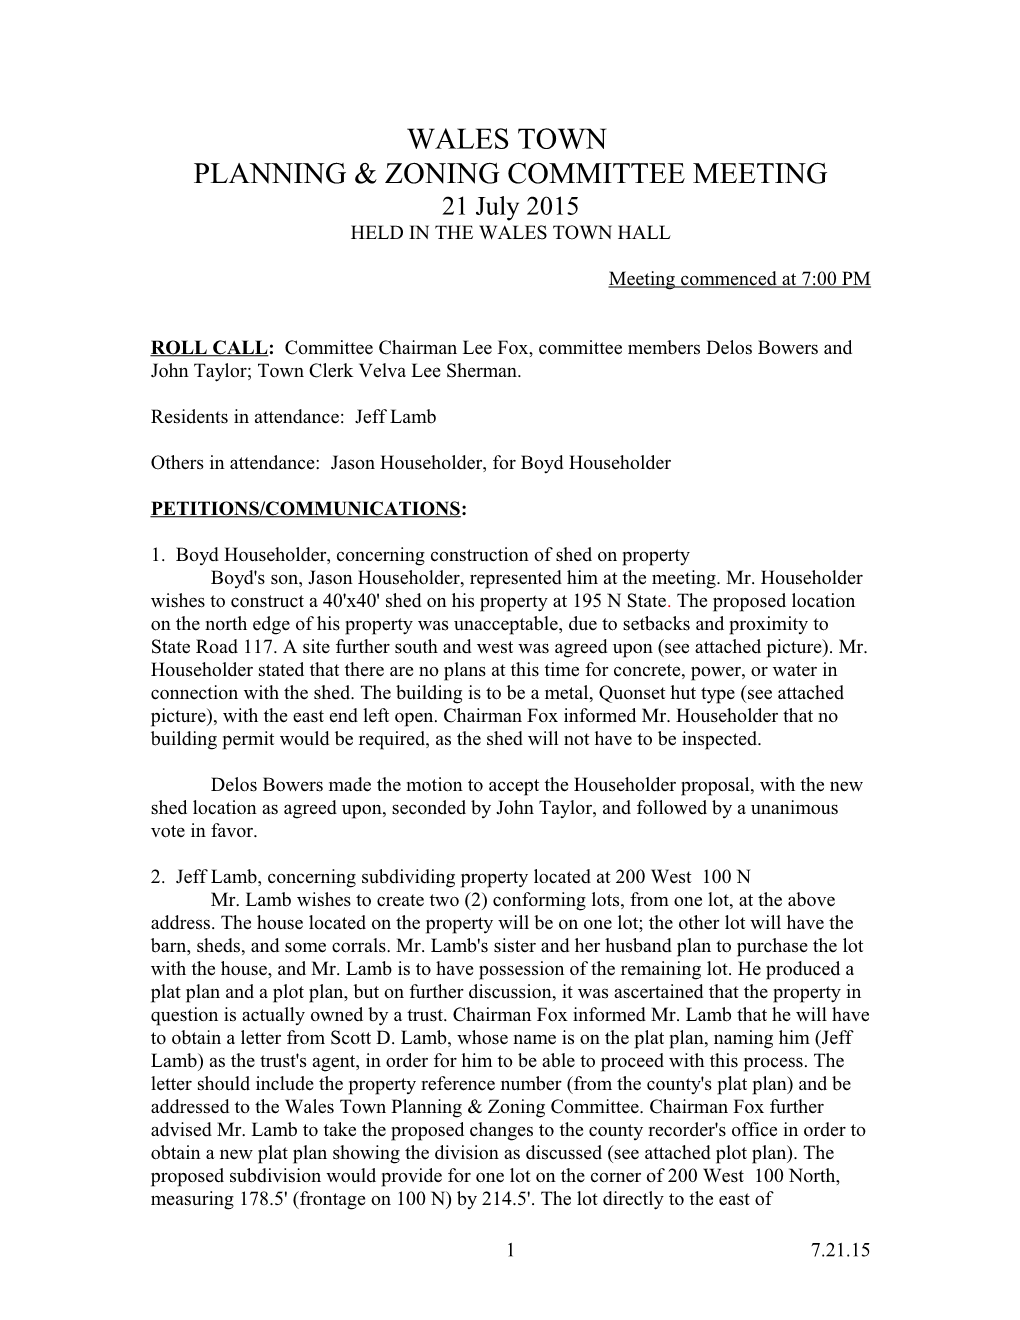 Wales Town Planning & Zoning Committee